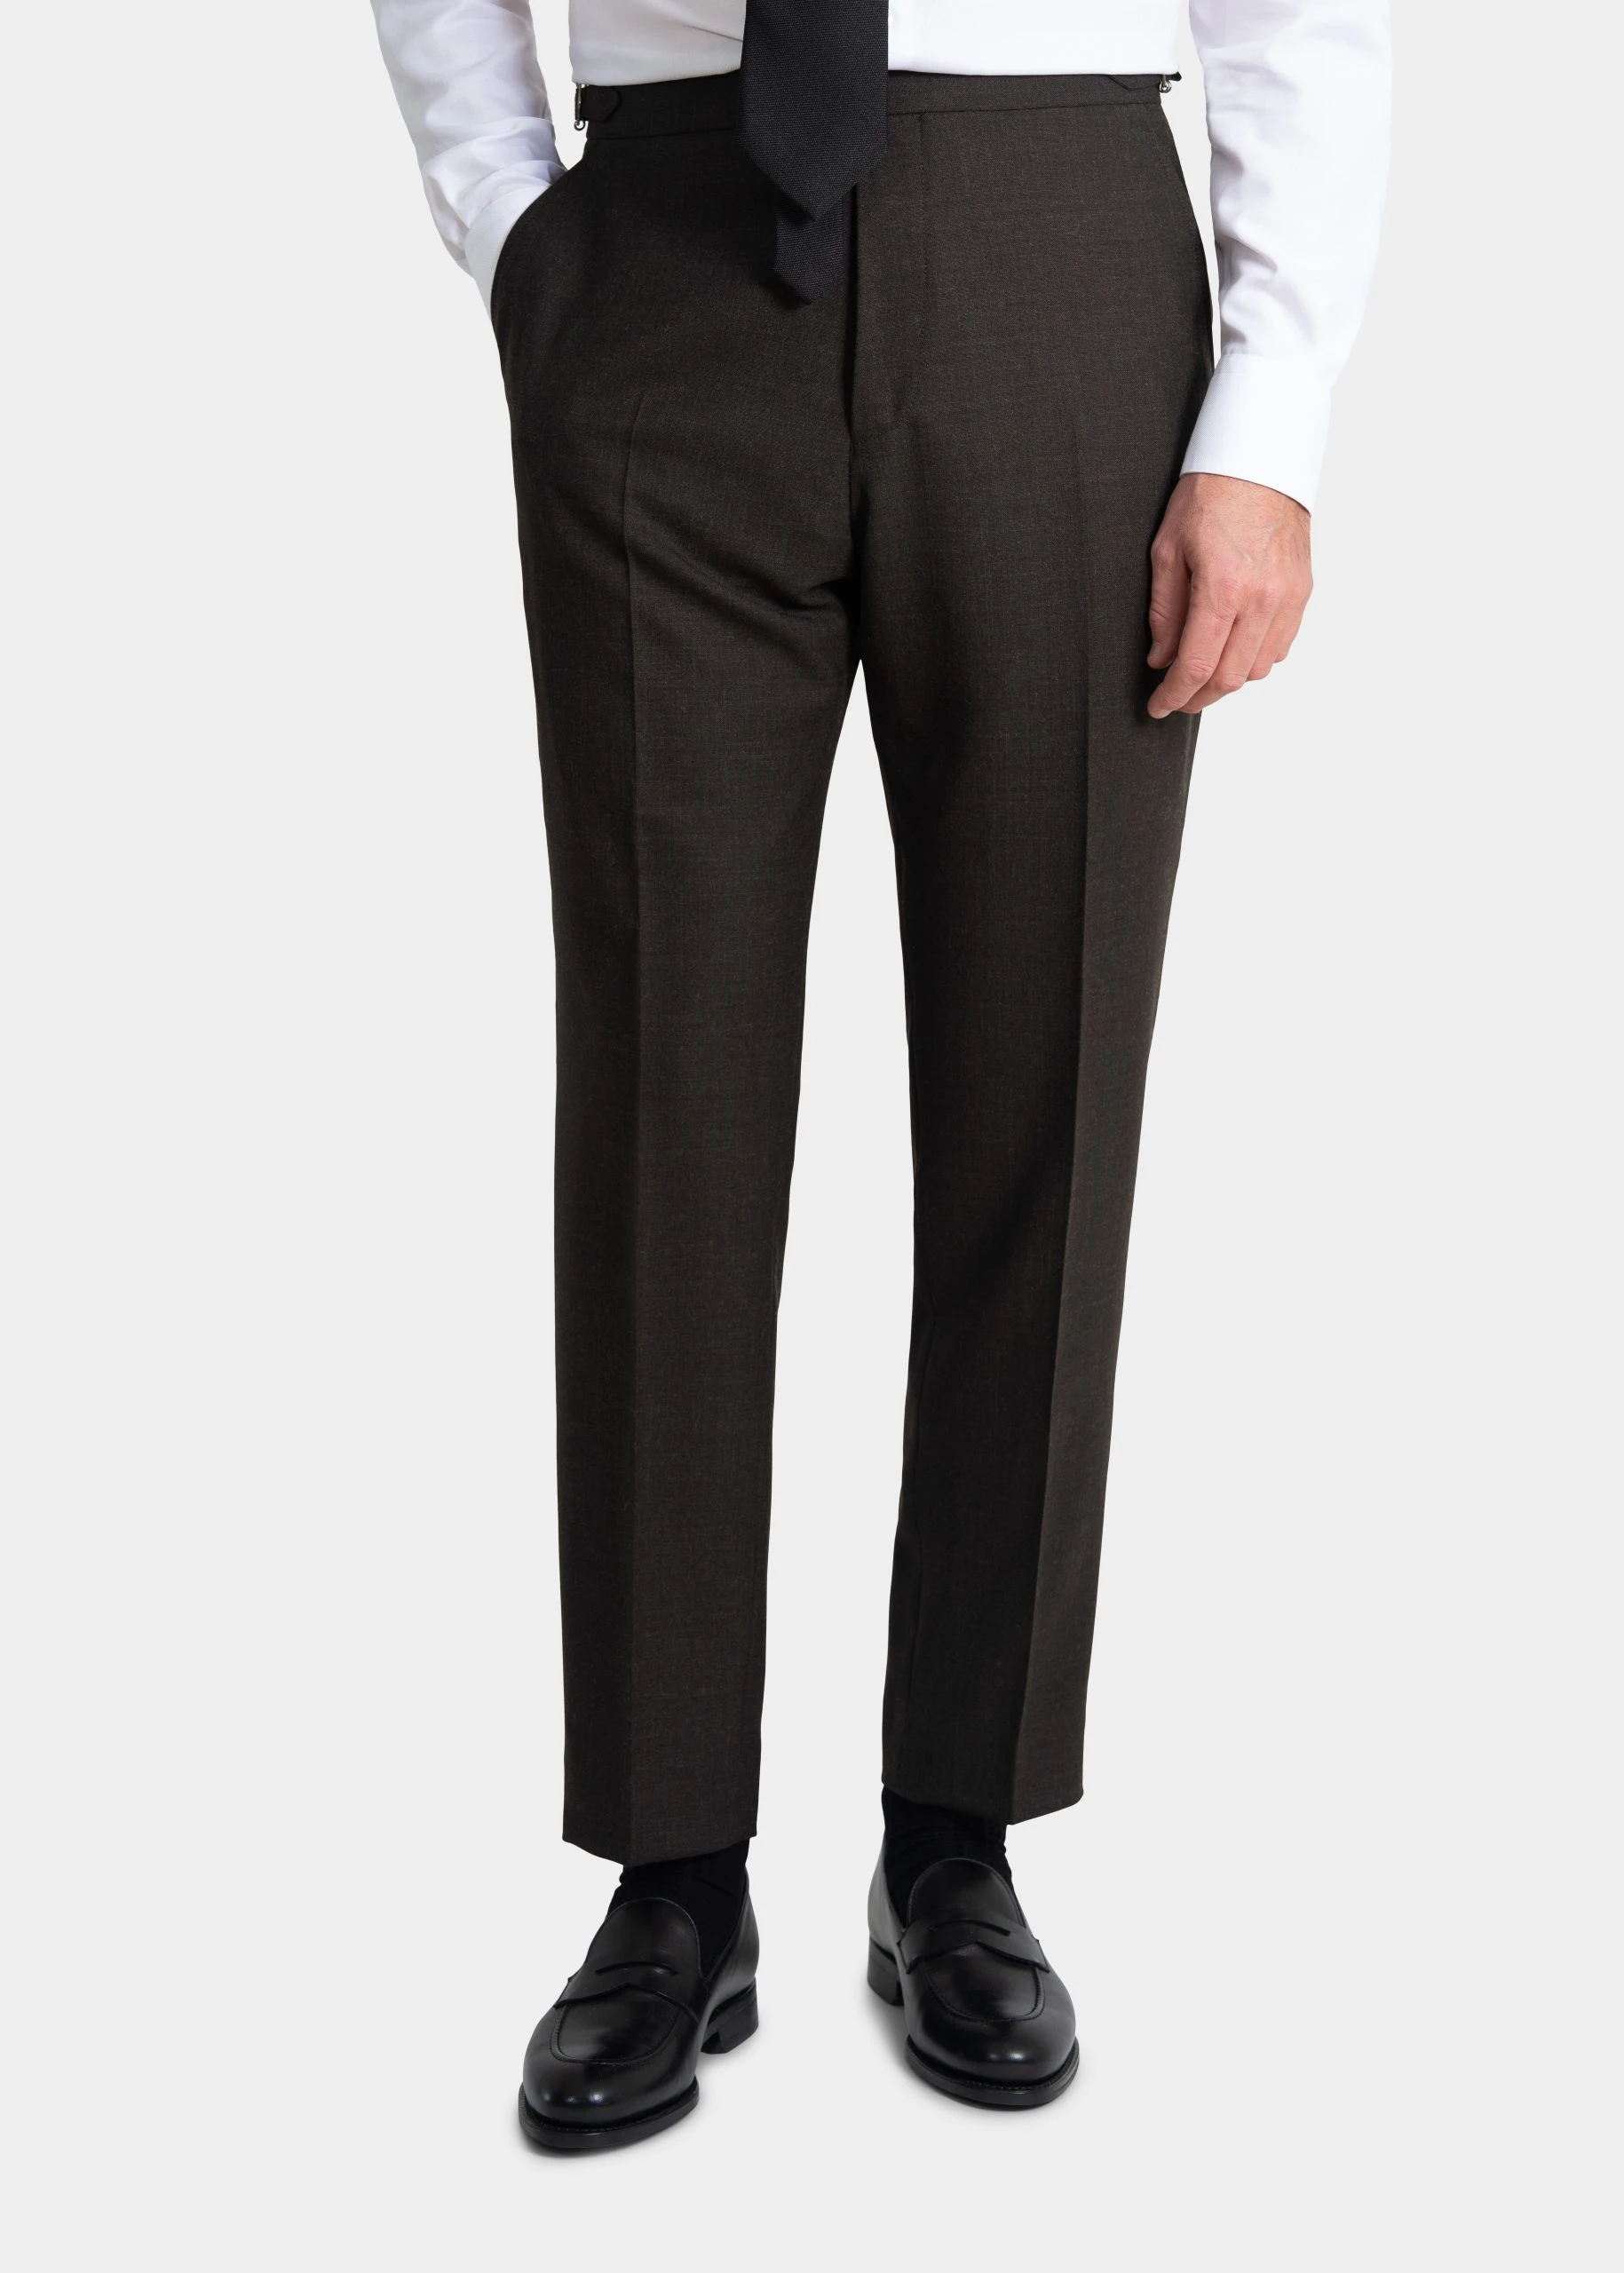 Custom-Made Pants Online, Tailored & Fitted for Men